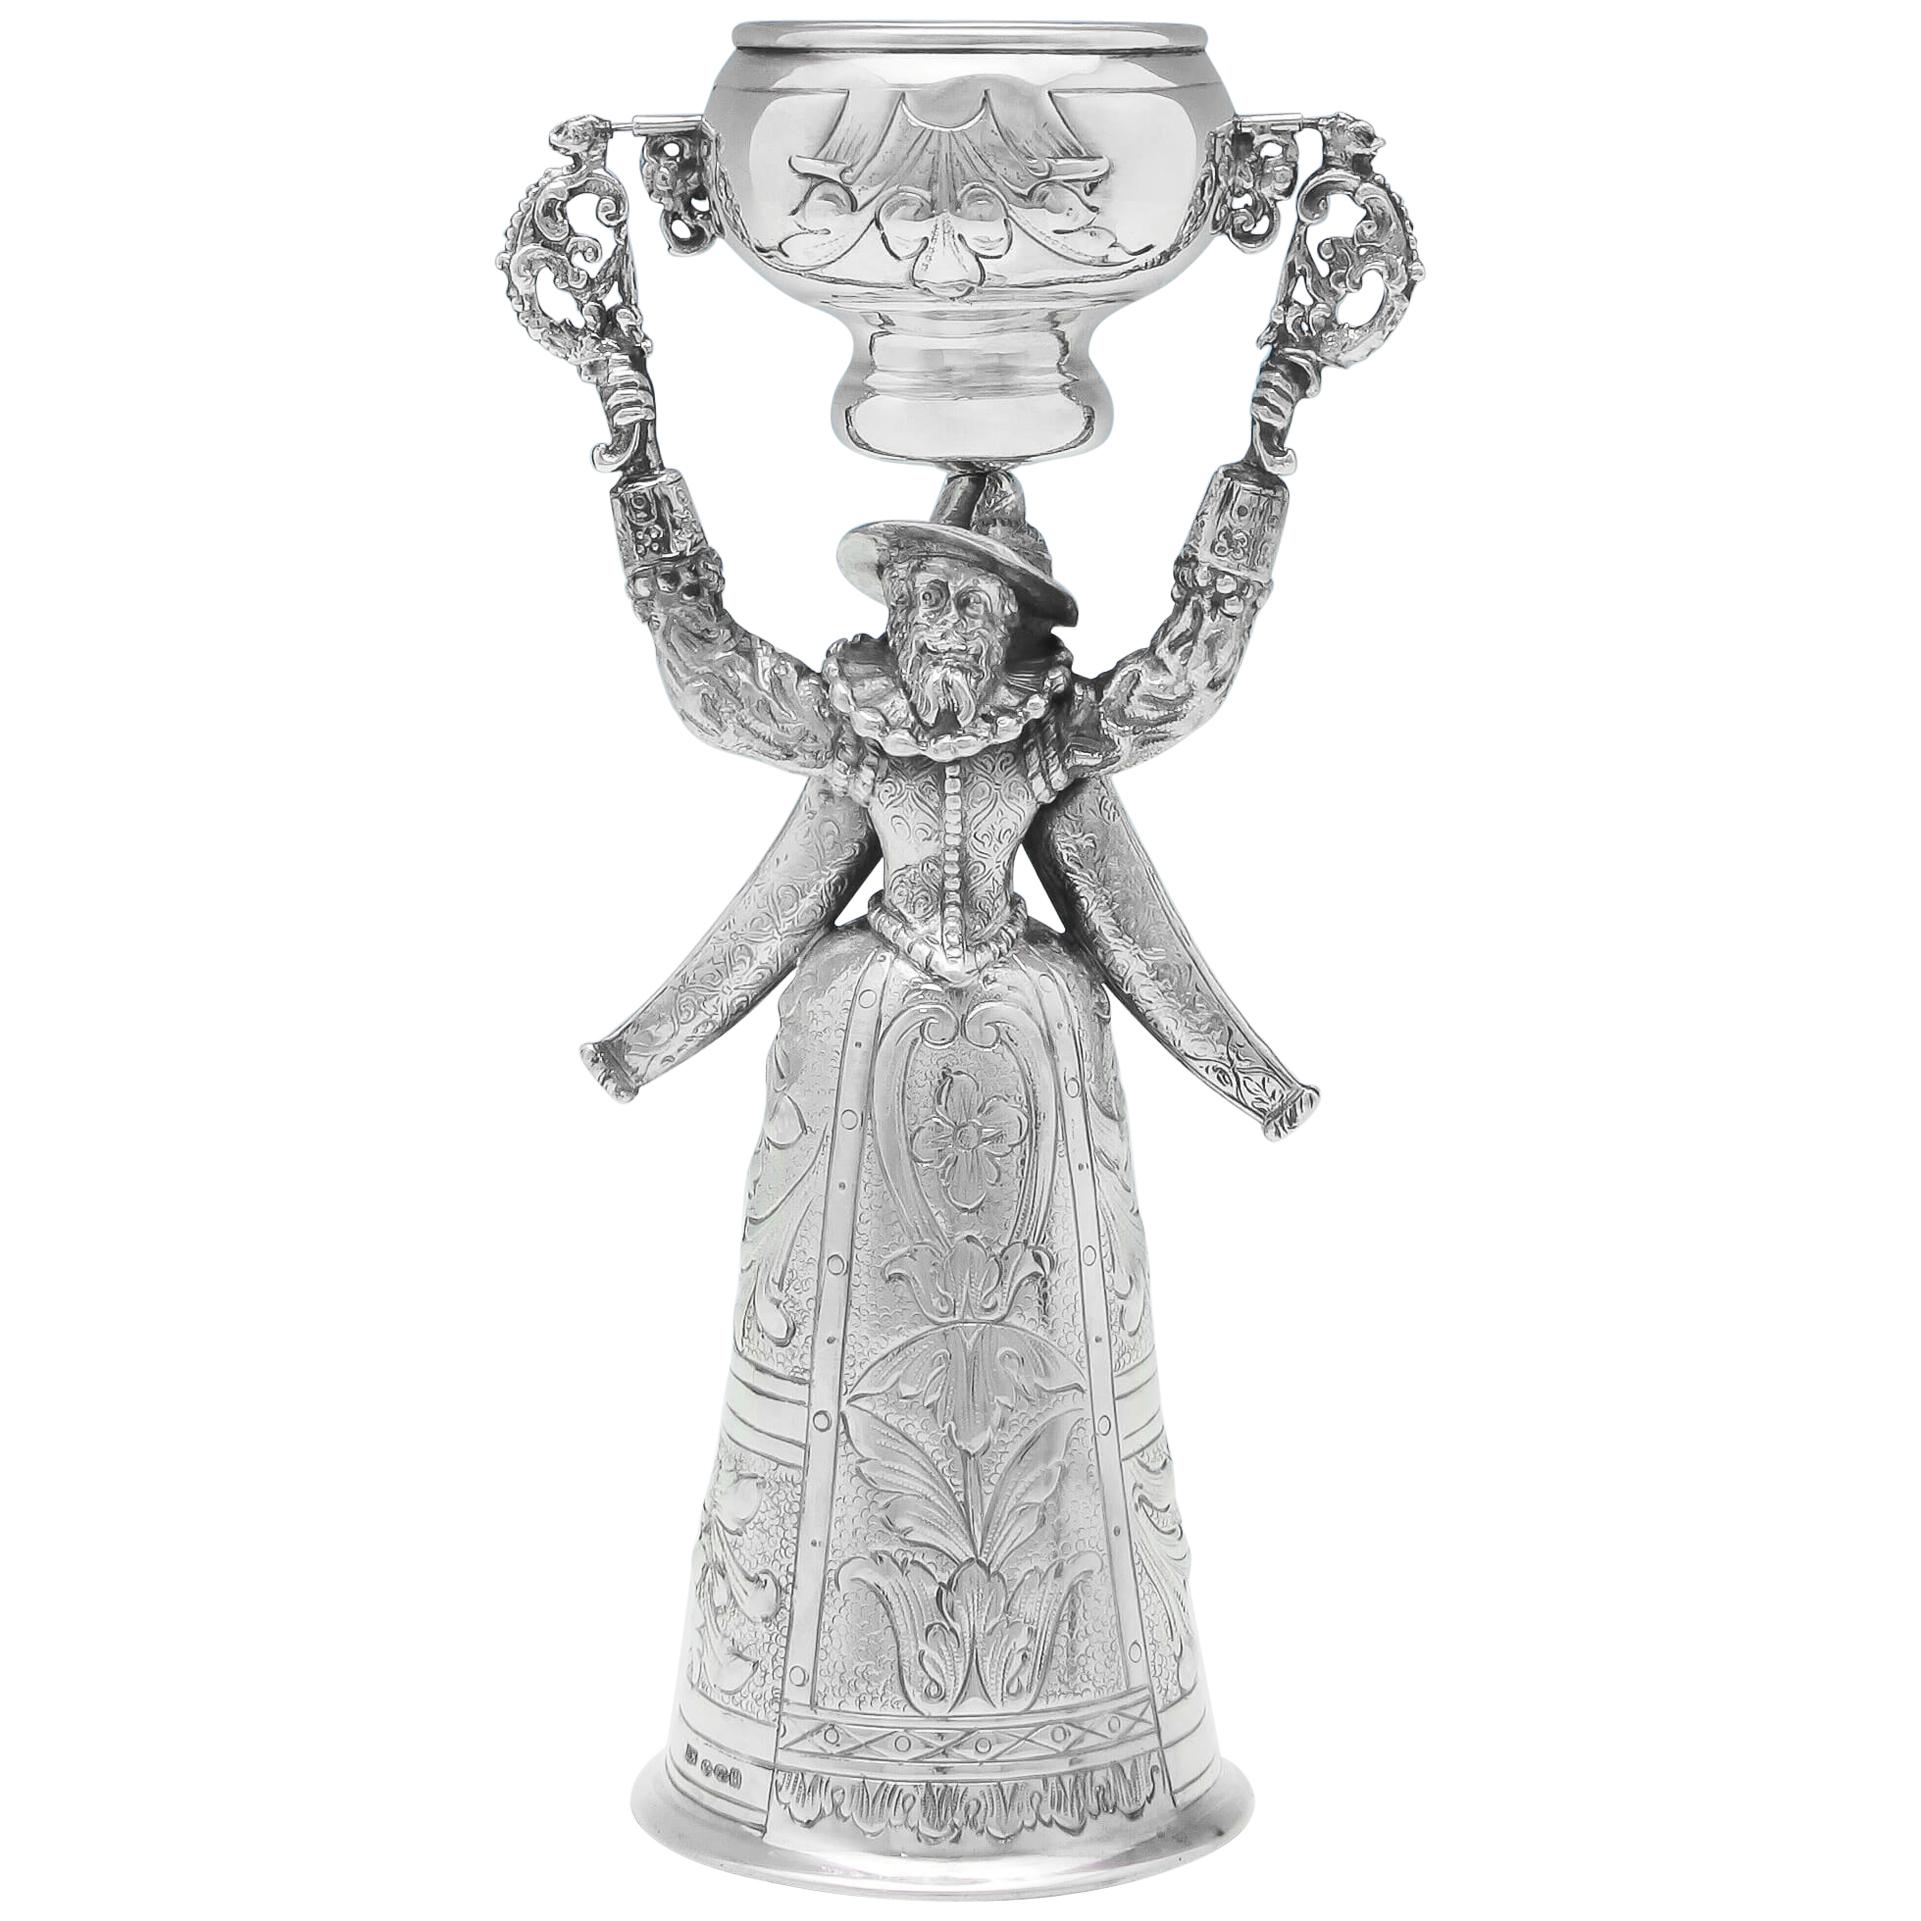 Import Marked Novelty 'Man in Drag' Sterling Silver Wager Cup by Muller in 1911